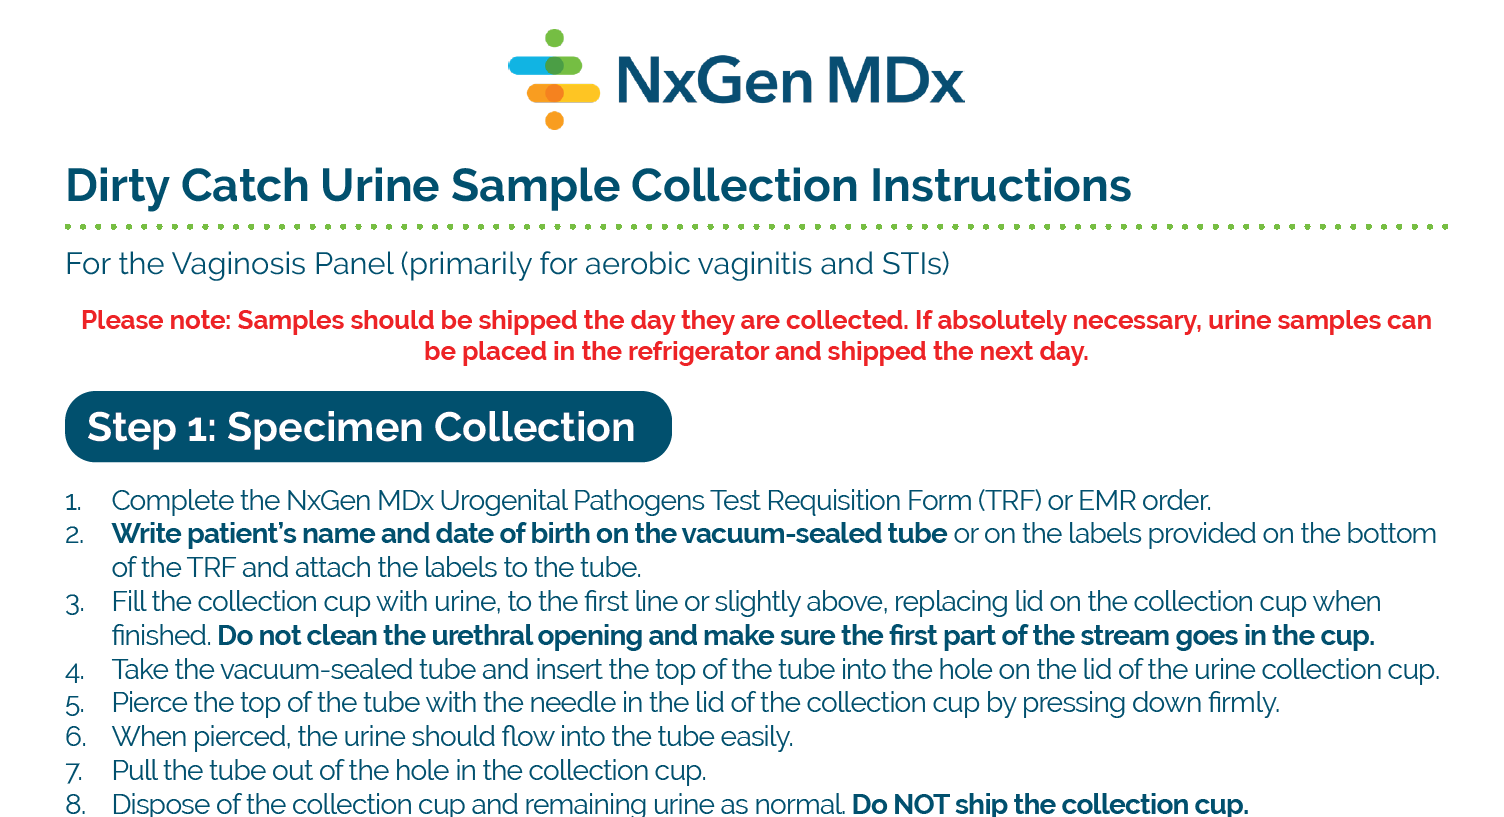 Link to Dirty Catch Urine Sample Instructions for Vaginosis Test